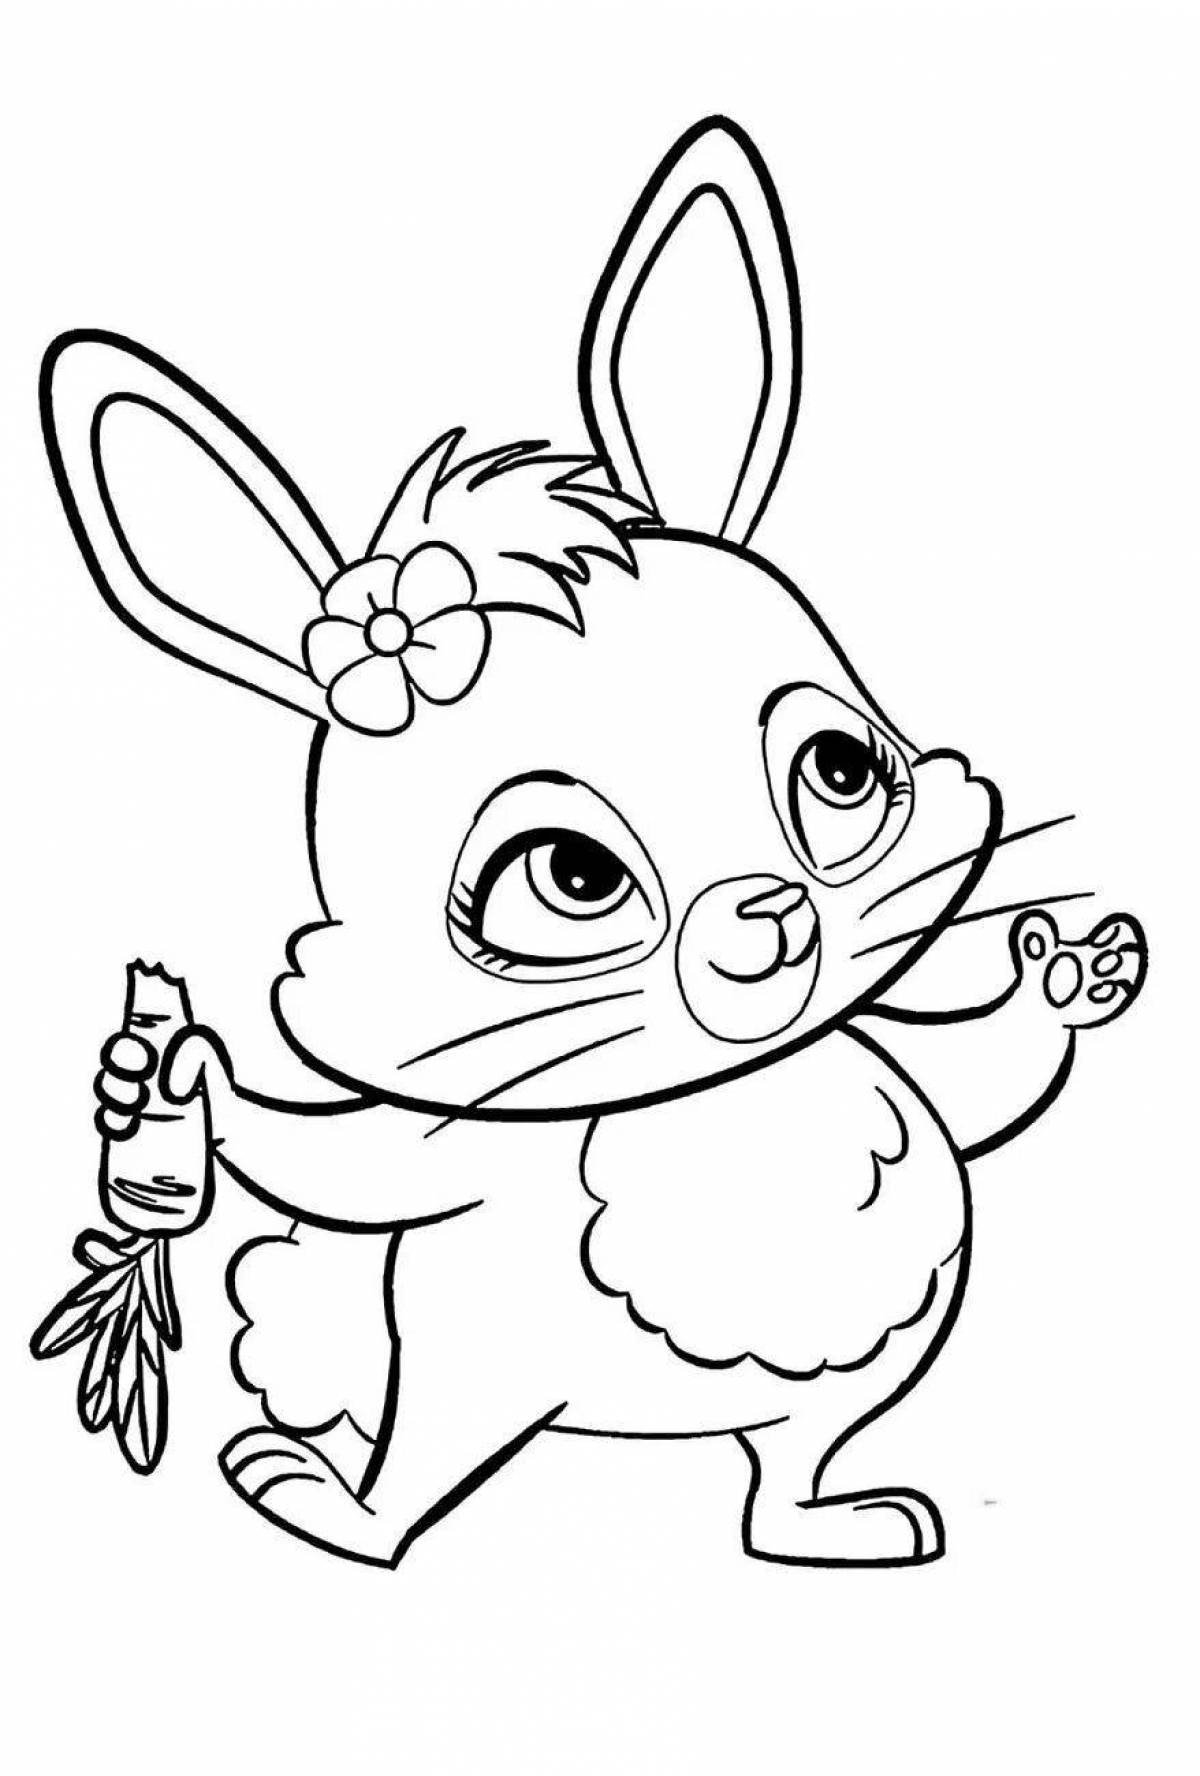 Furry bunny doll coloring book